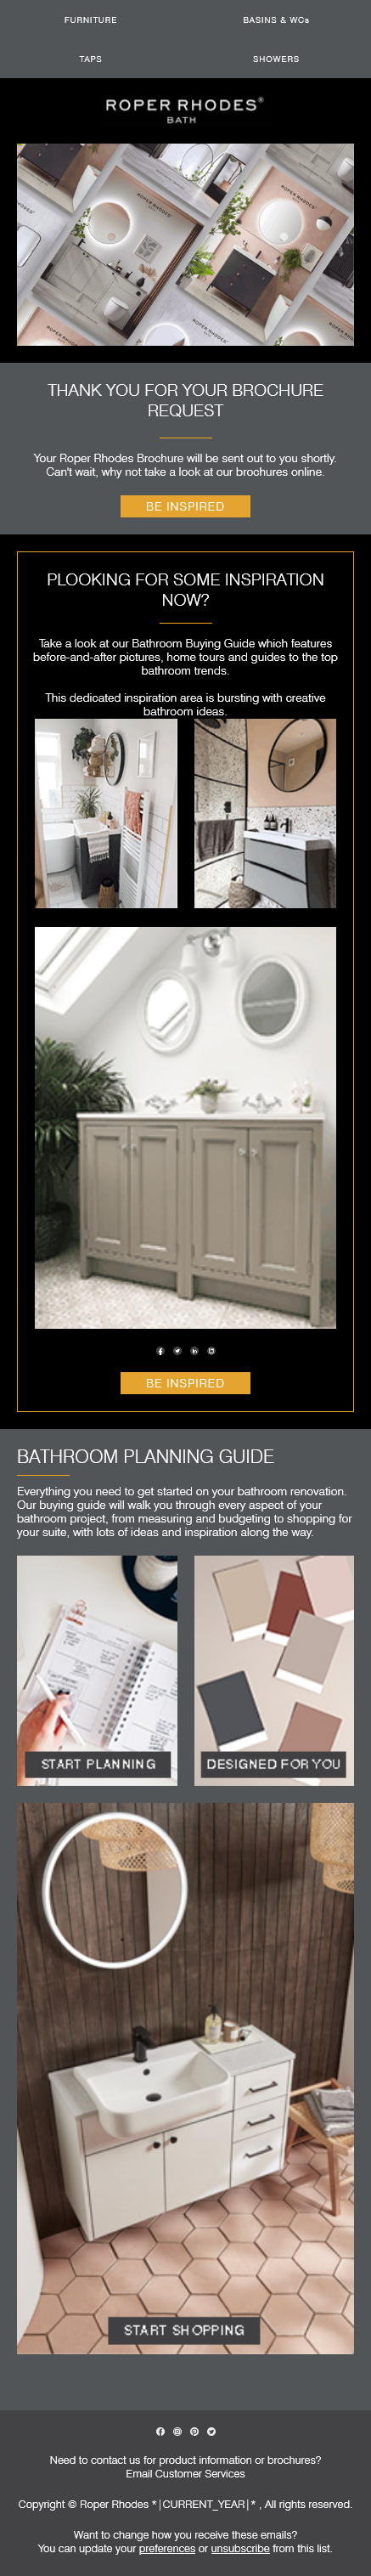 Email Templates Created For Roper Rhodes Marketing Bath rooms Dark mode on mobile design